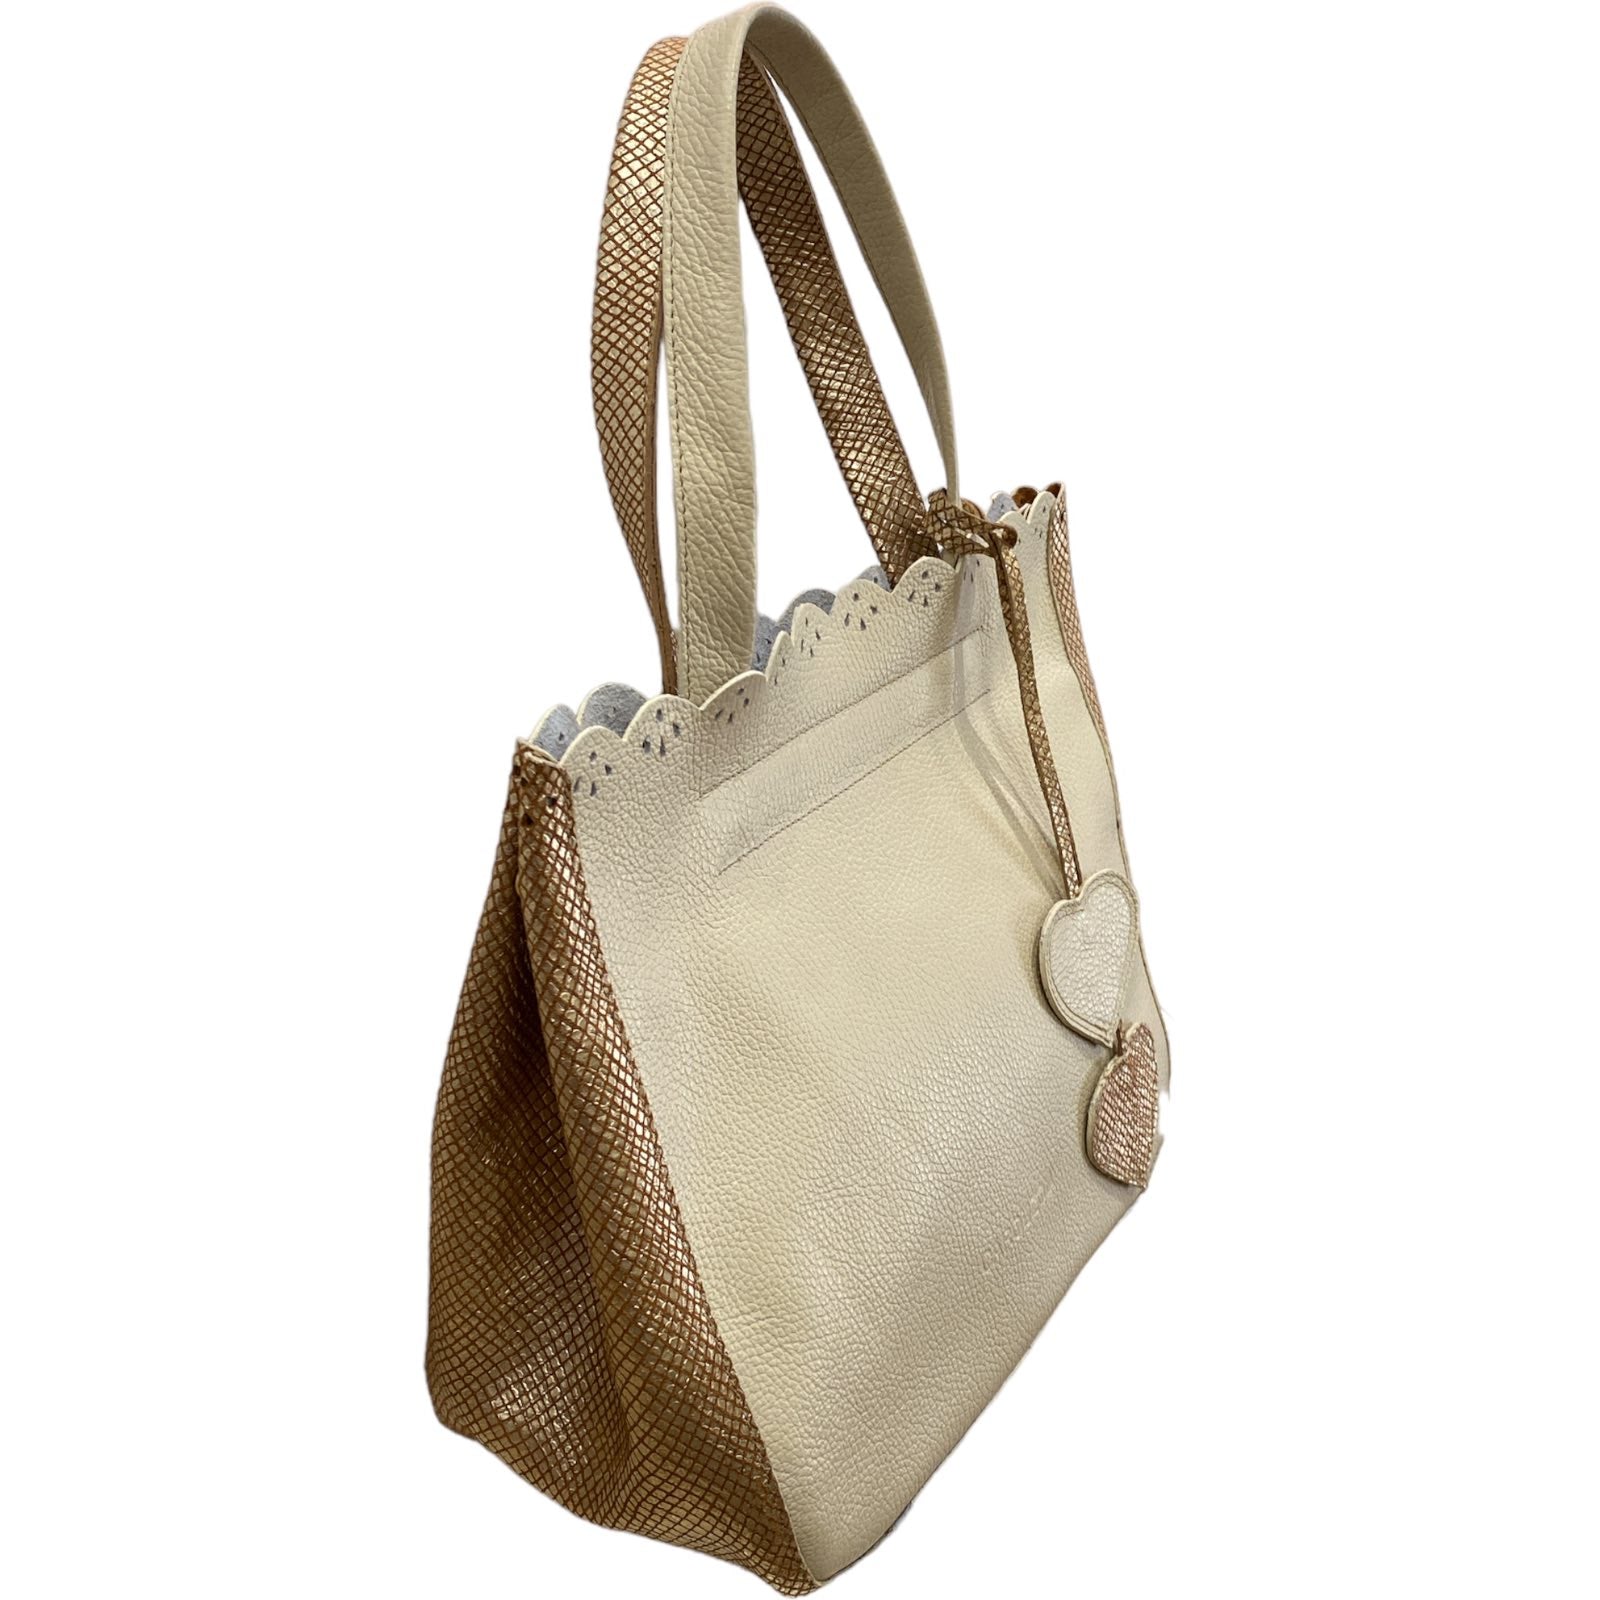 Darling. Vanilla and gold leather chic shoulder bag